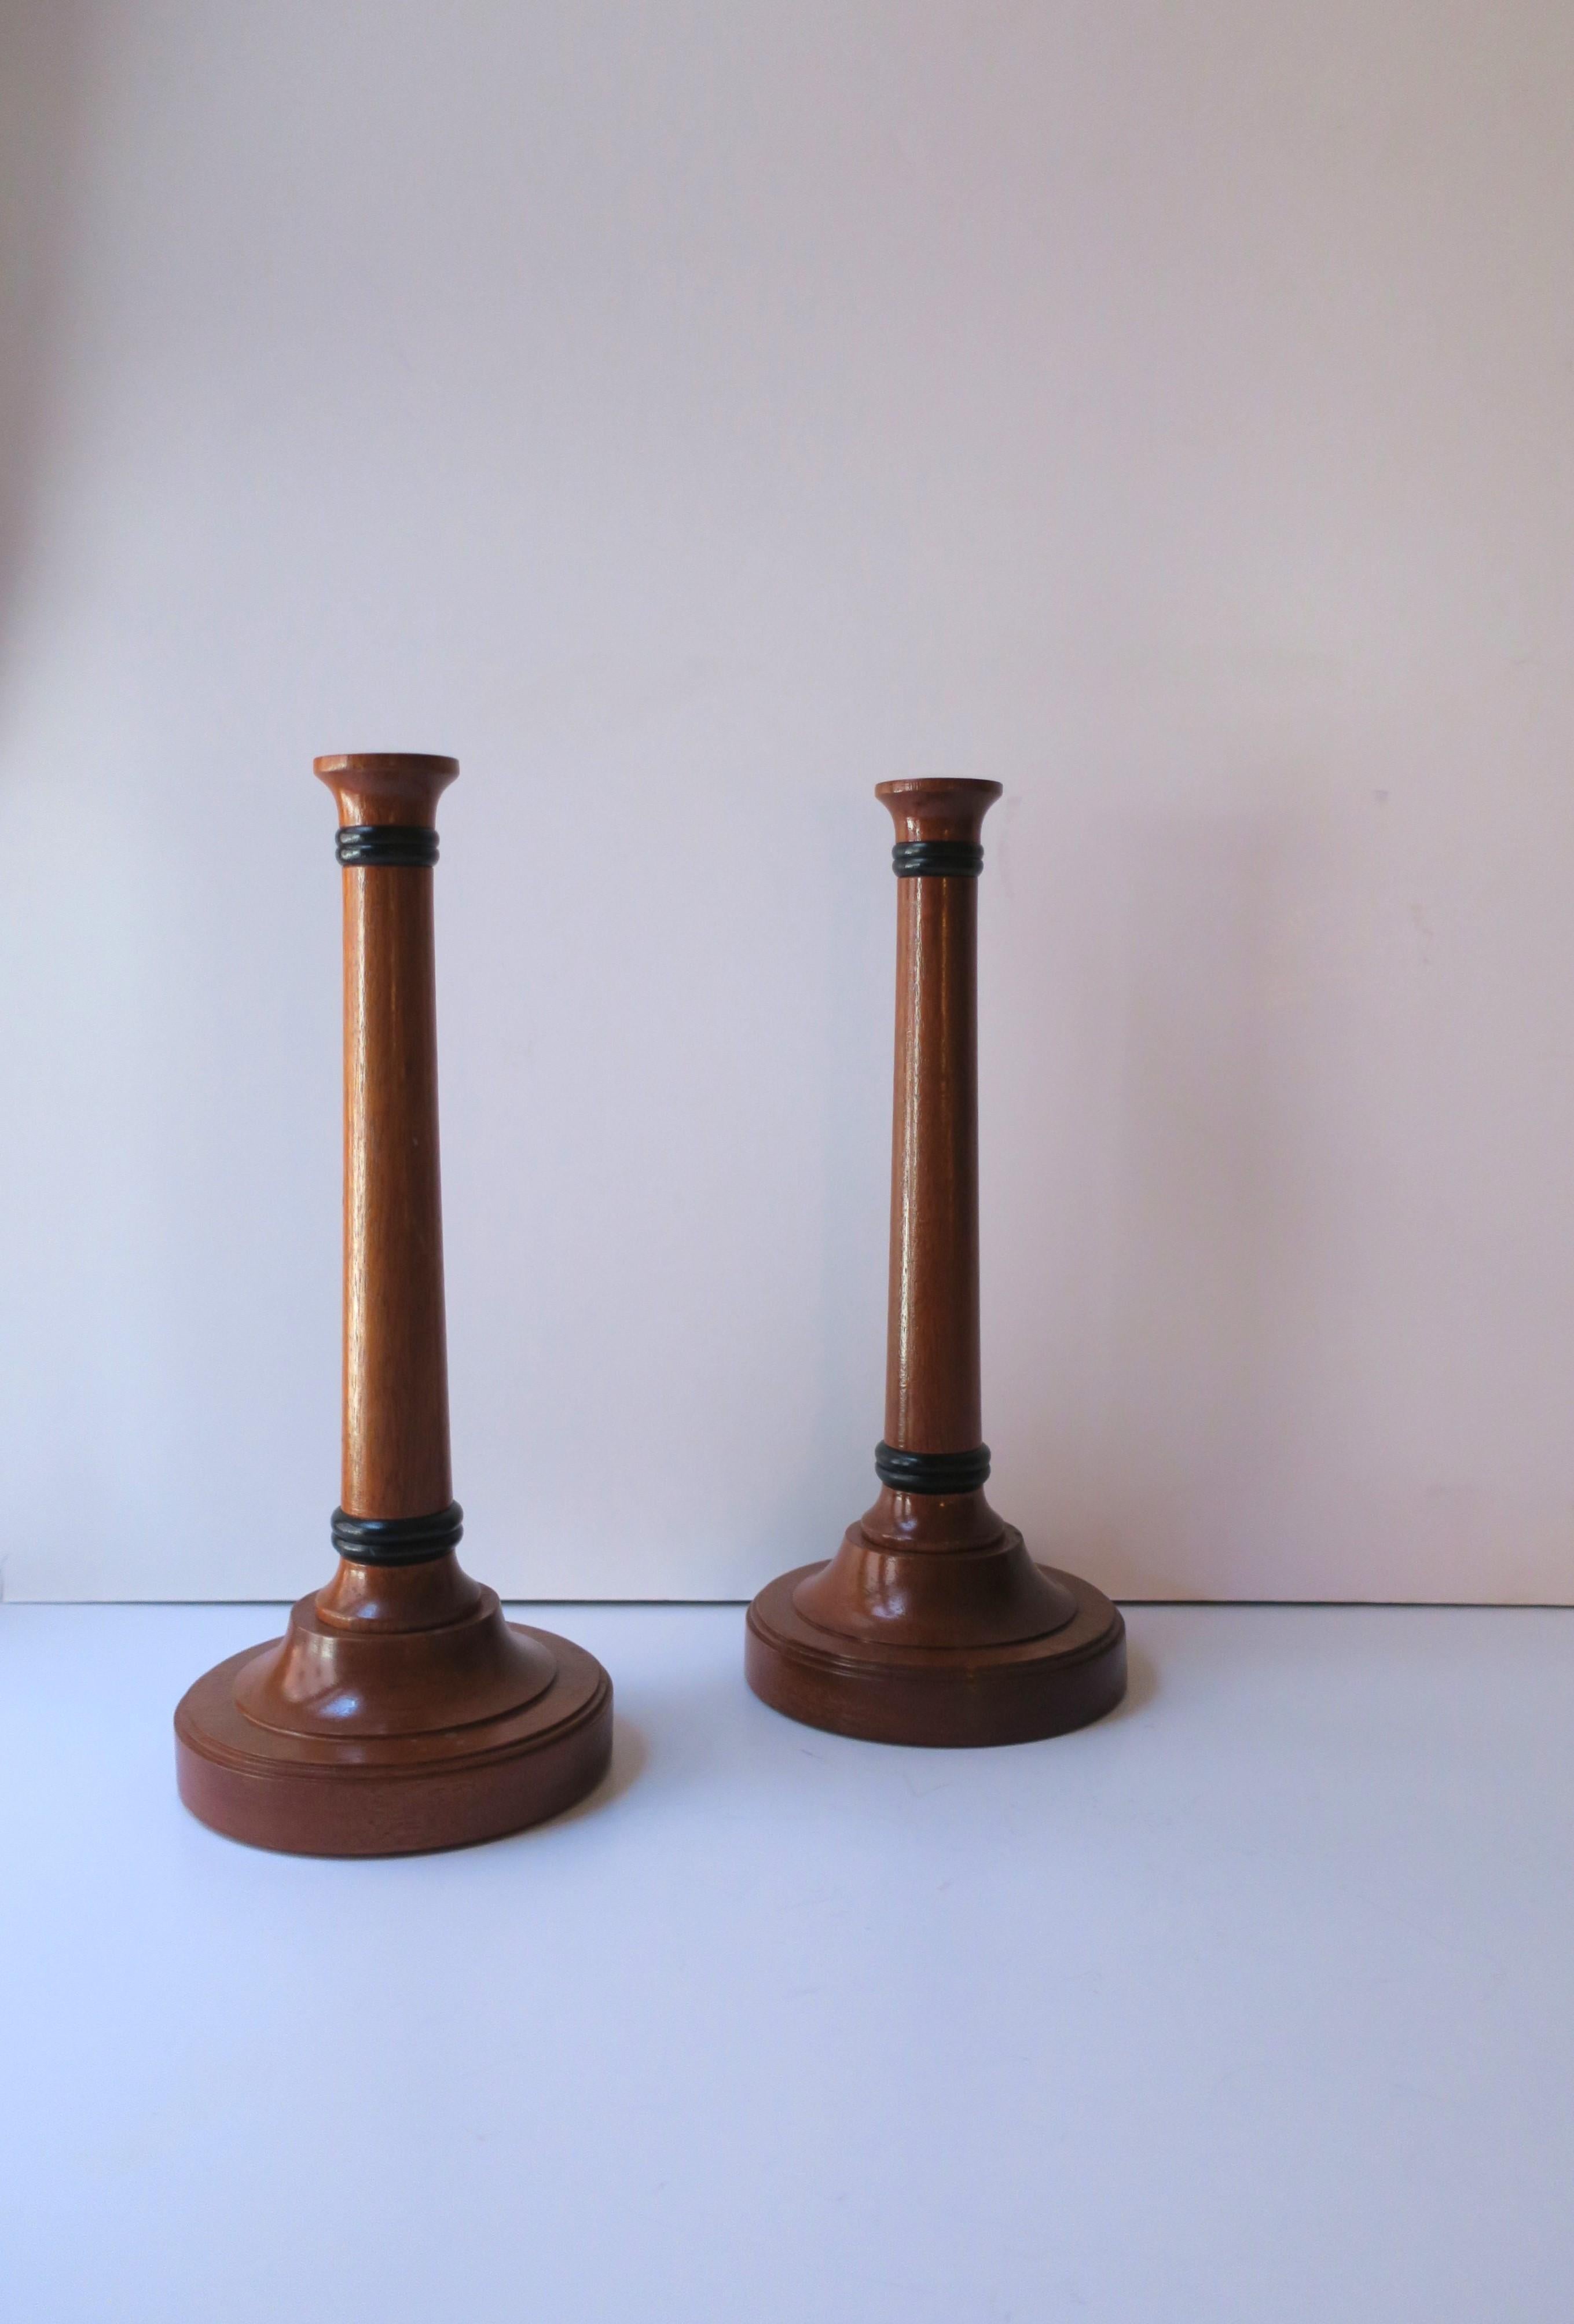 English Wood Candlesticks Holders, Pair In Excellent Condition For Sale In New York, NY